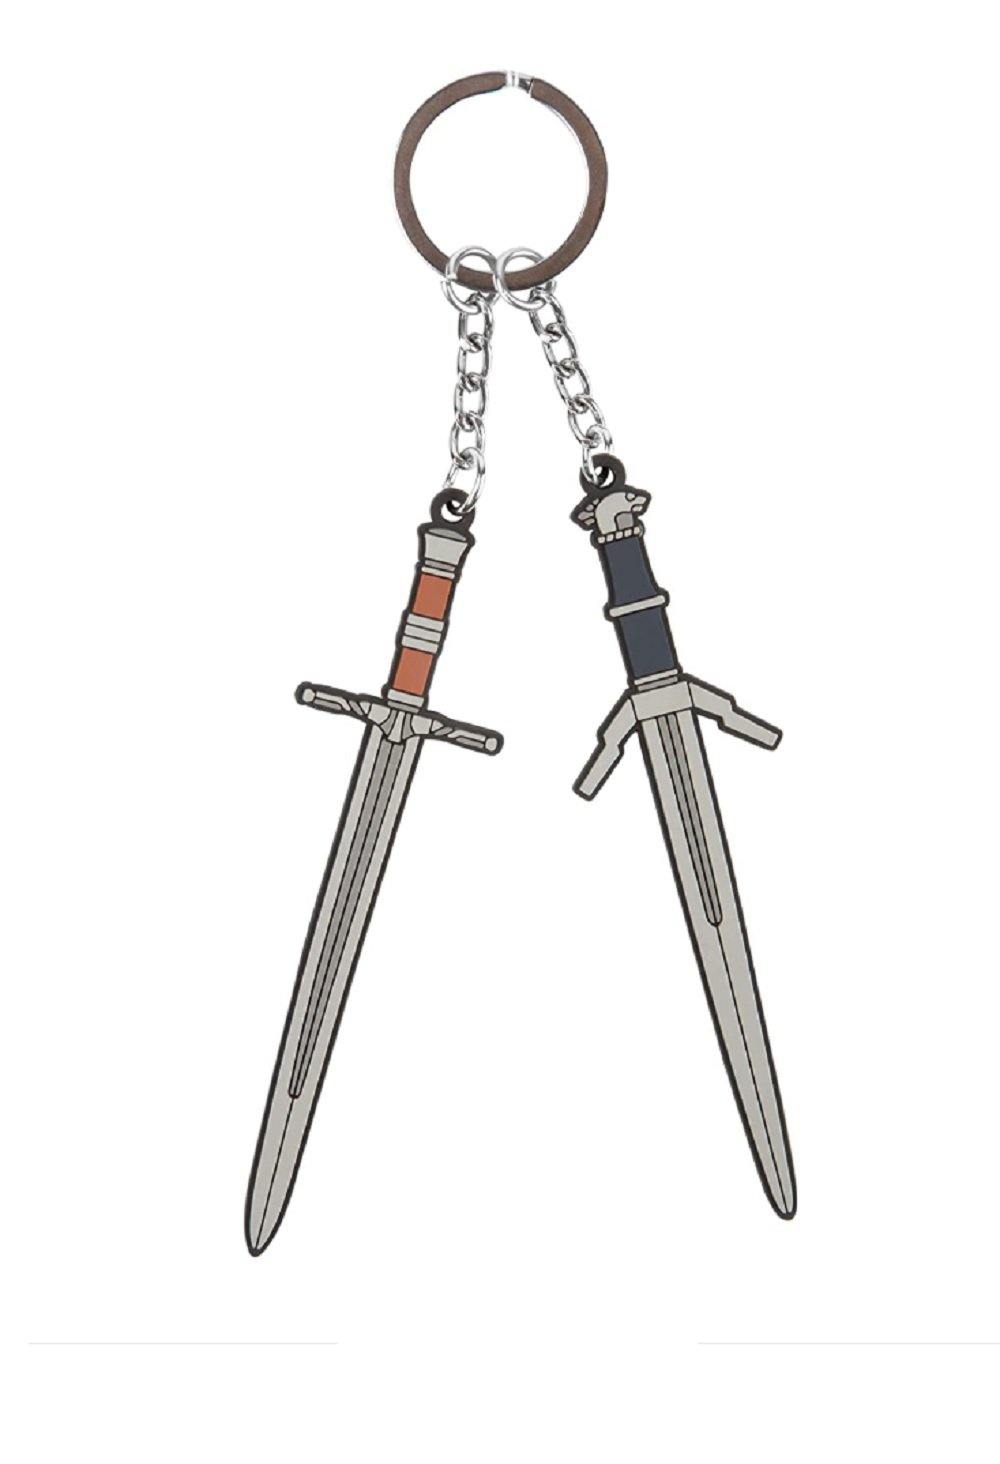 The Witcher 3 Steel n' Silver Gamer Rubber Key Chain